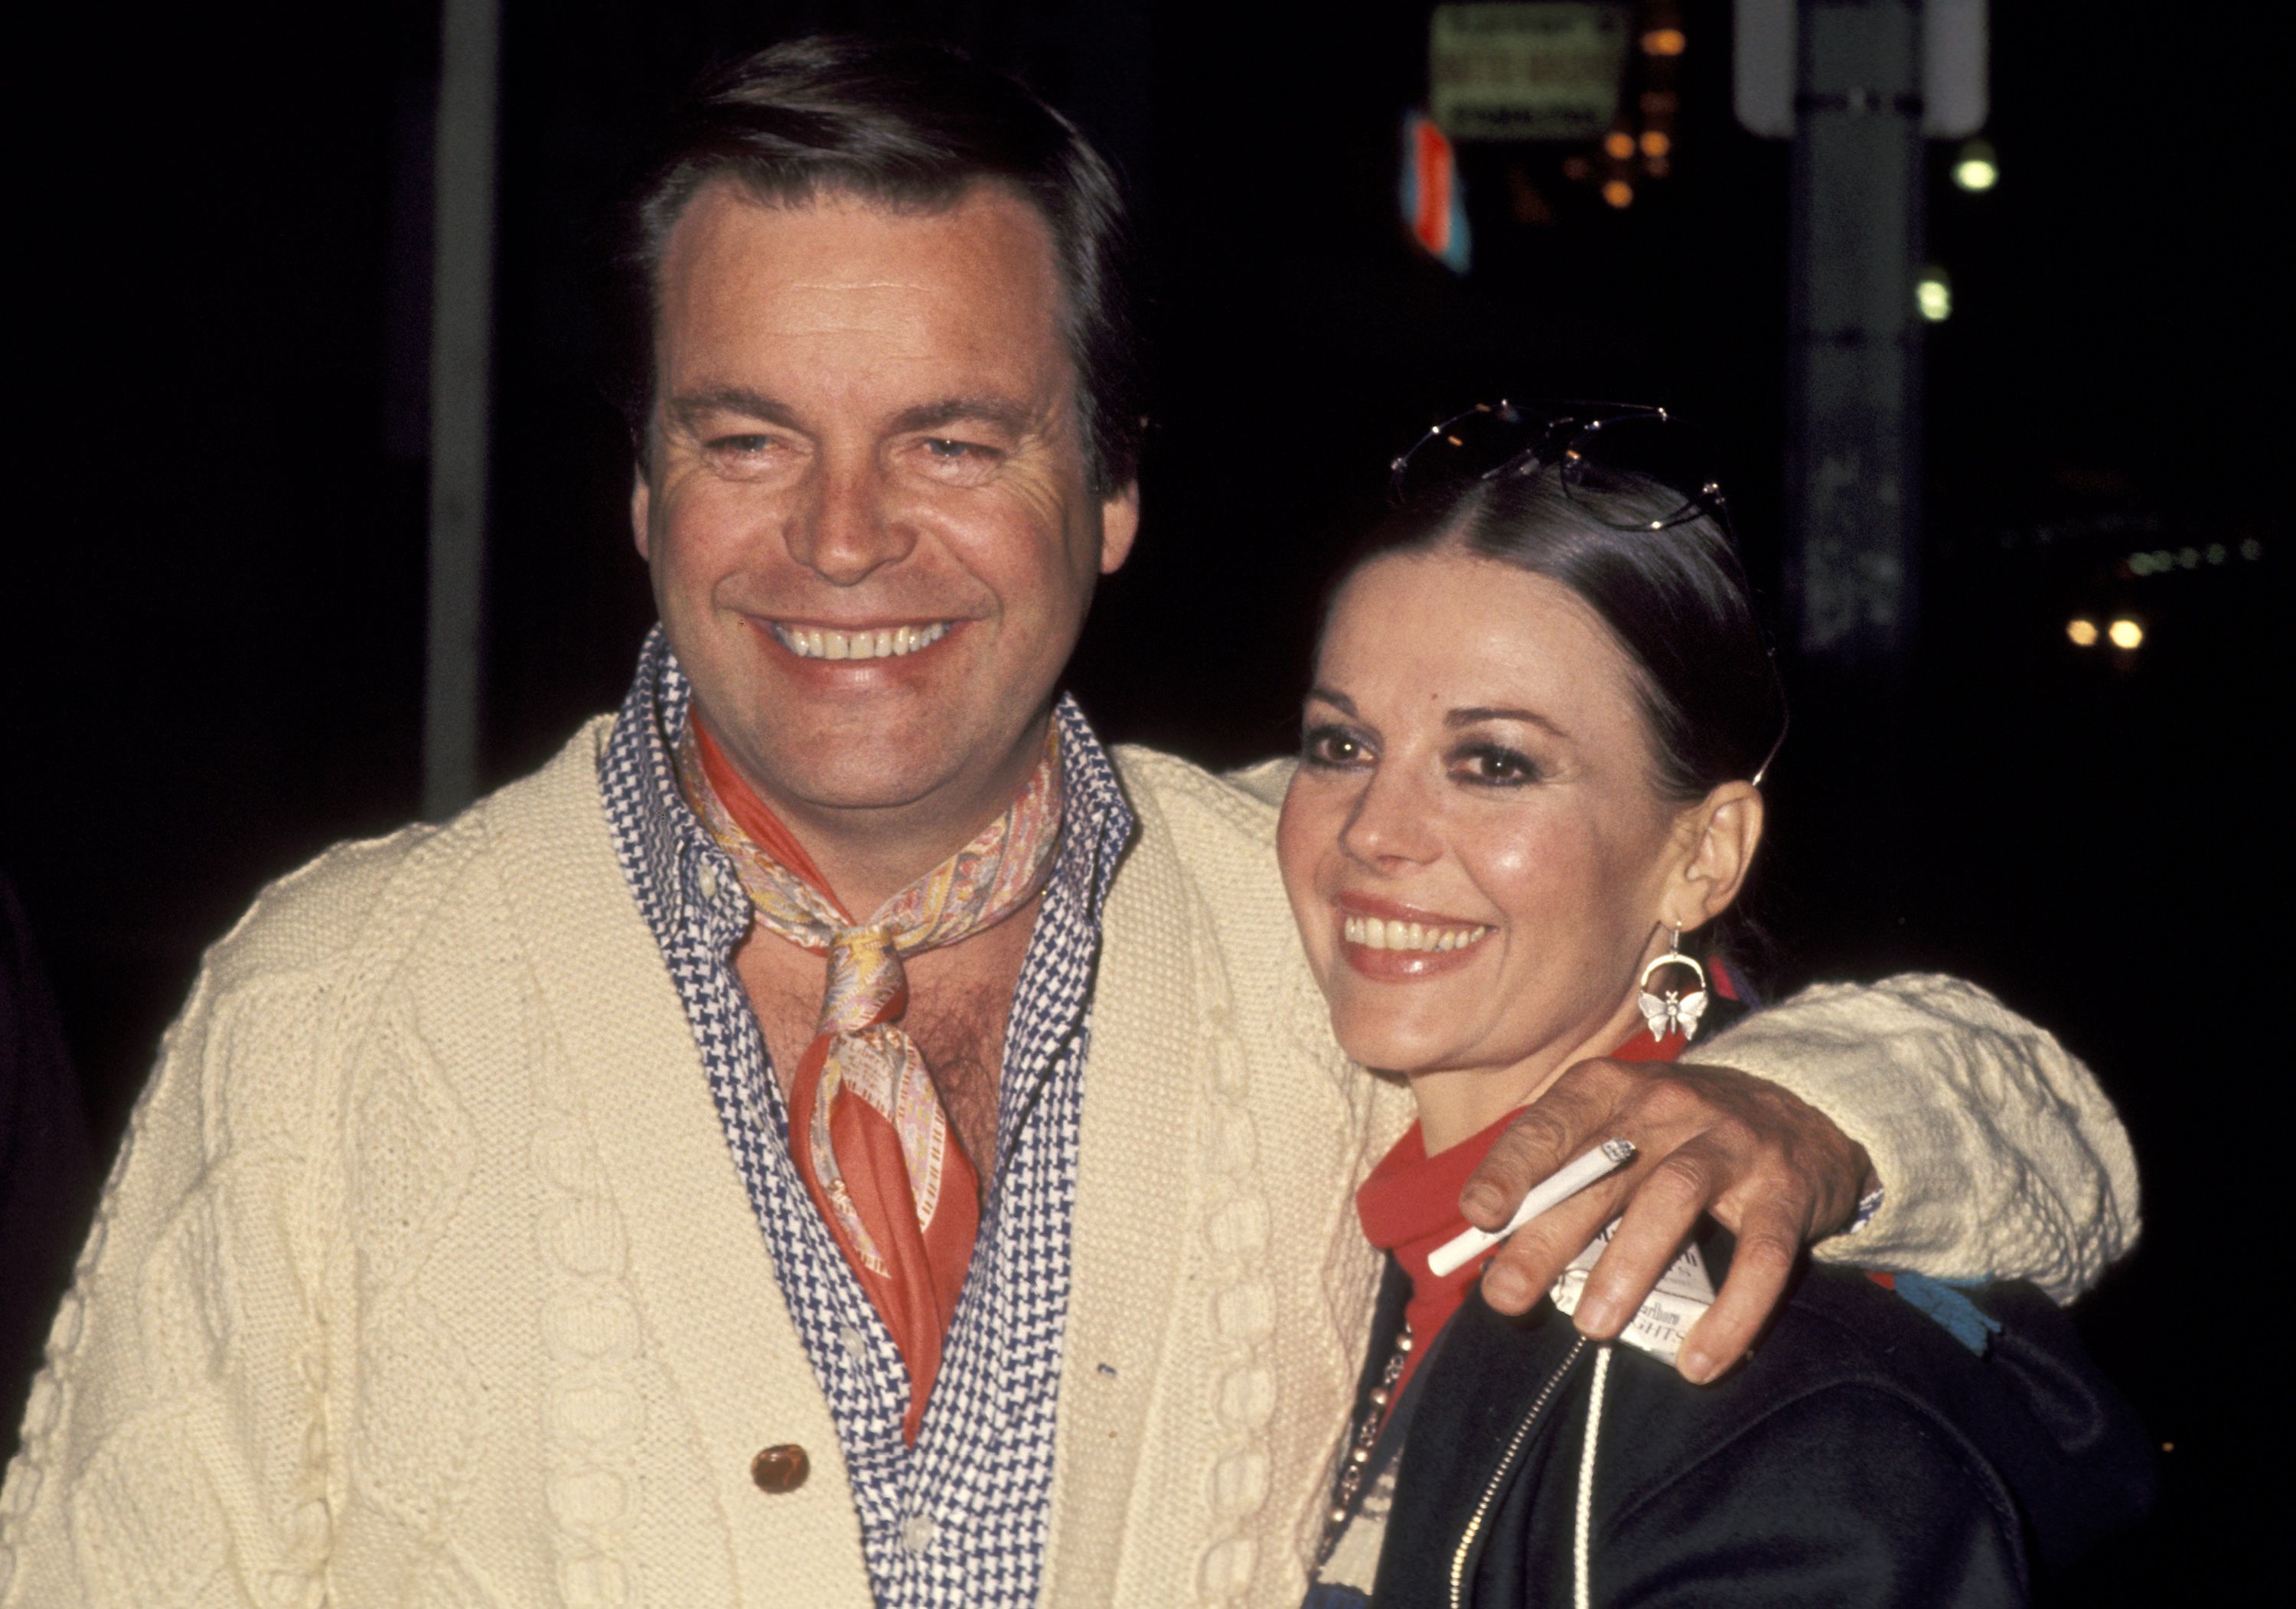 Did Natalie Woods Spouse Robert Wagner Play A Role In Her Death? photo